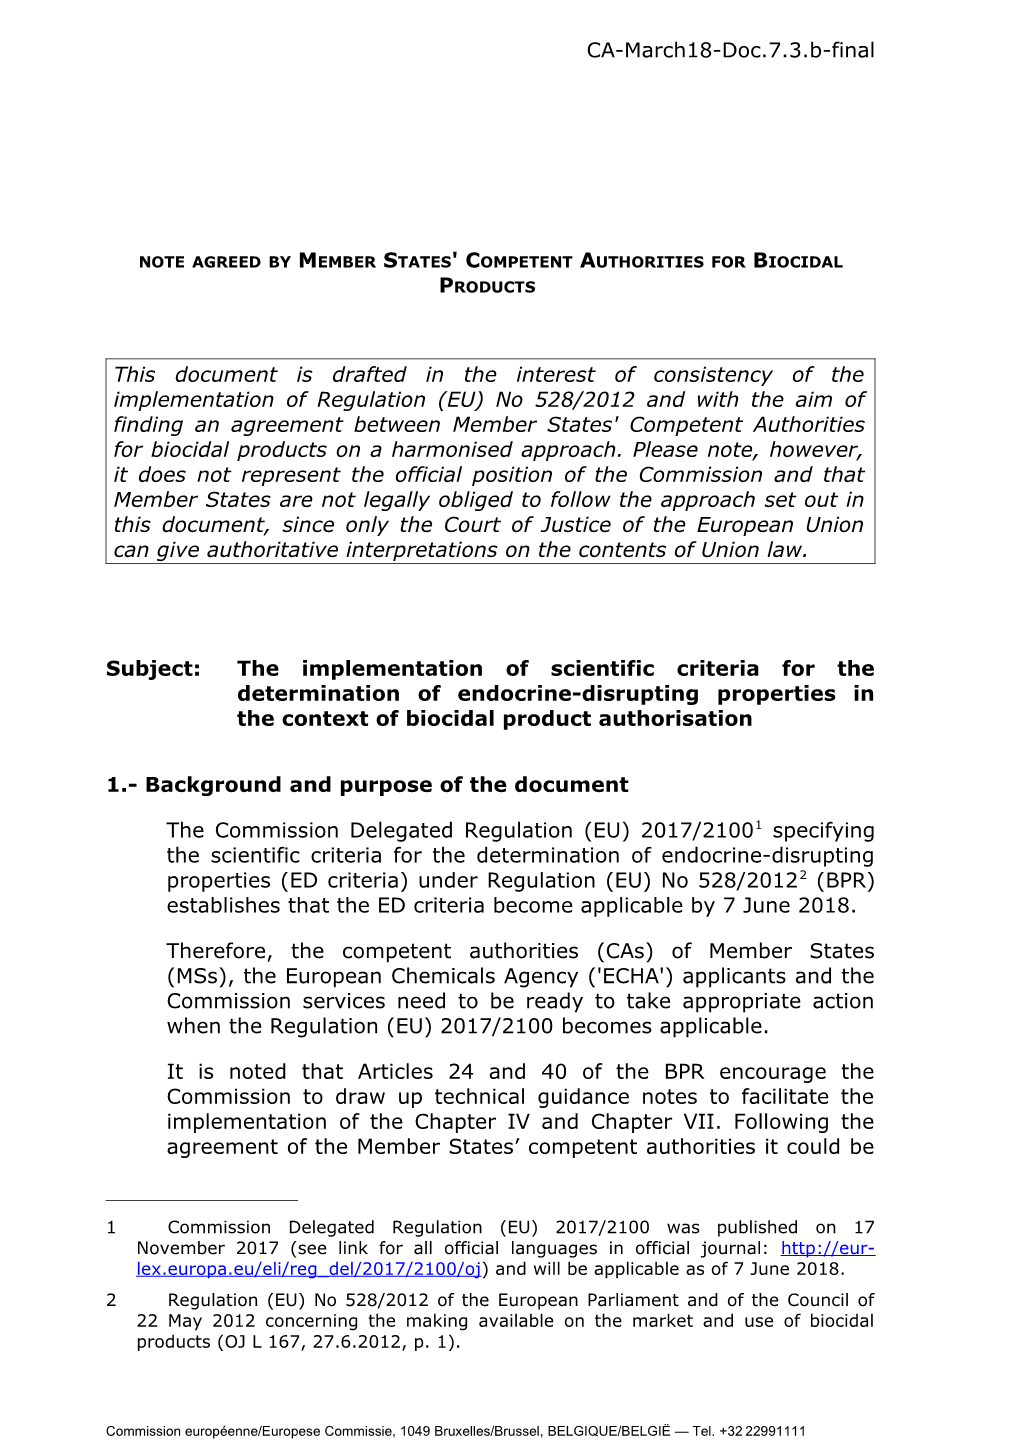 Note Agreed by Member States' Competent Authorities for Biocidal Products